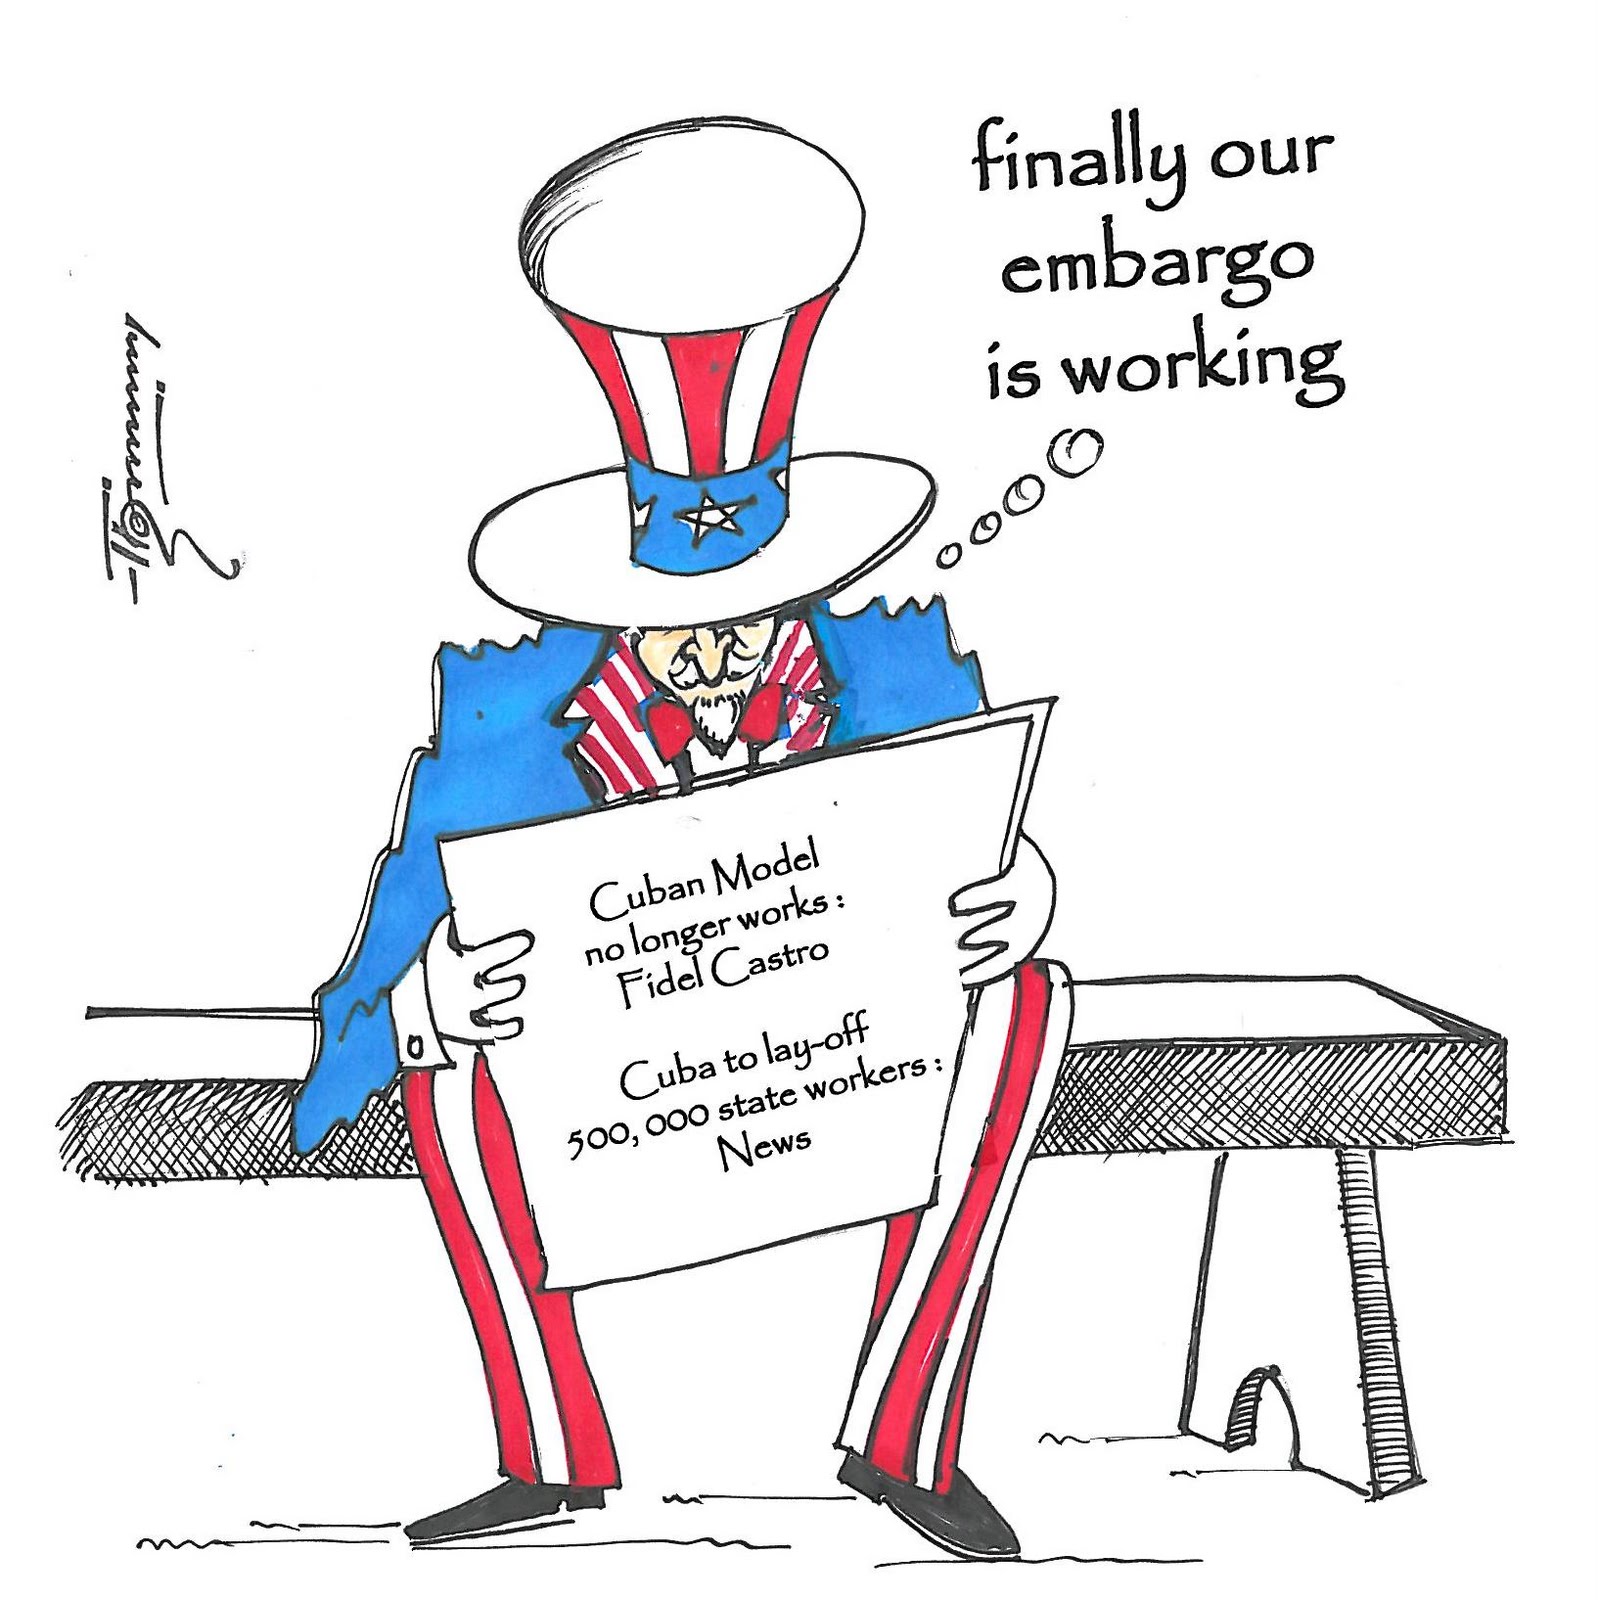 Drawn Opinions ©: Effects of US embargo on Cuba